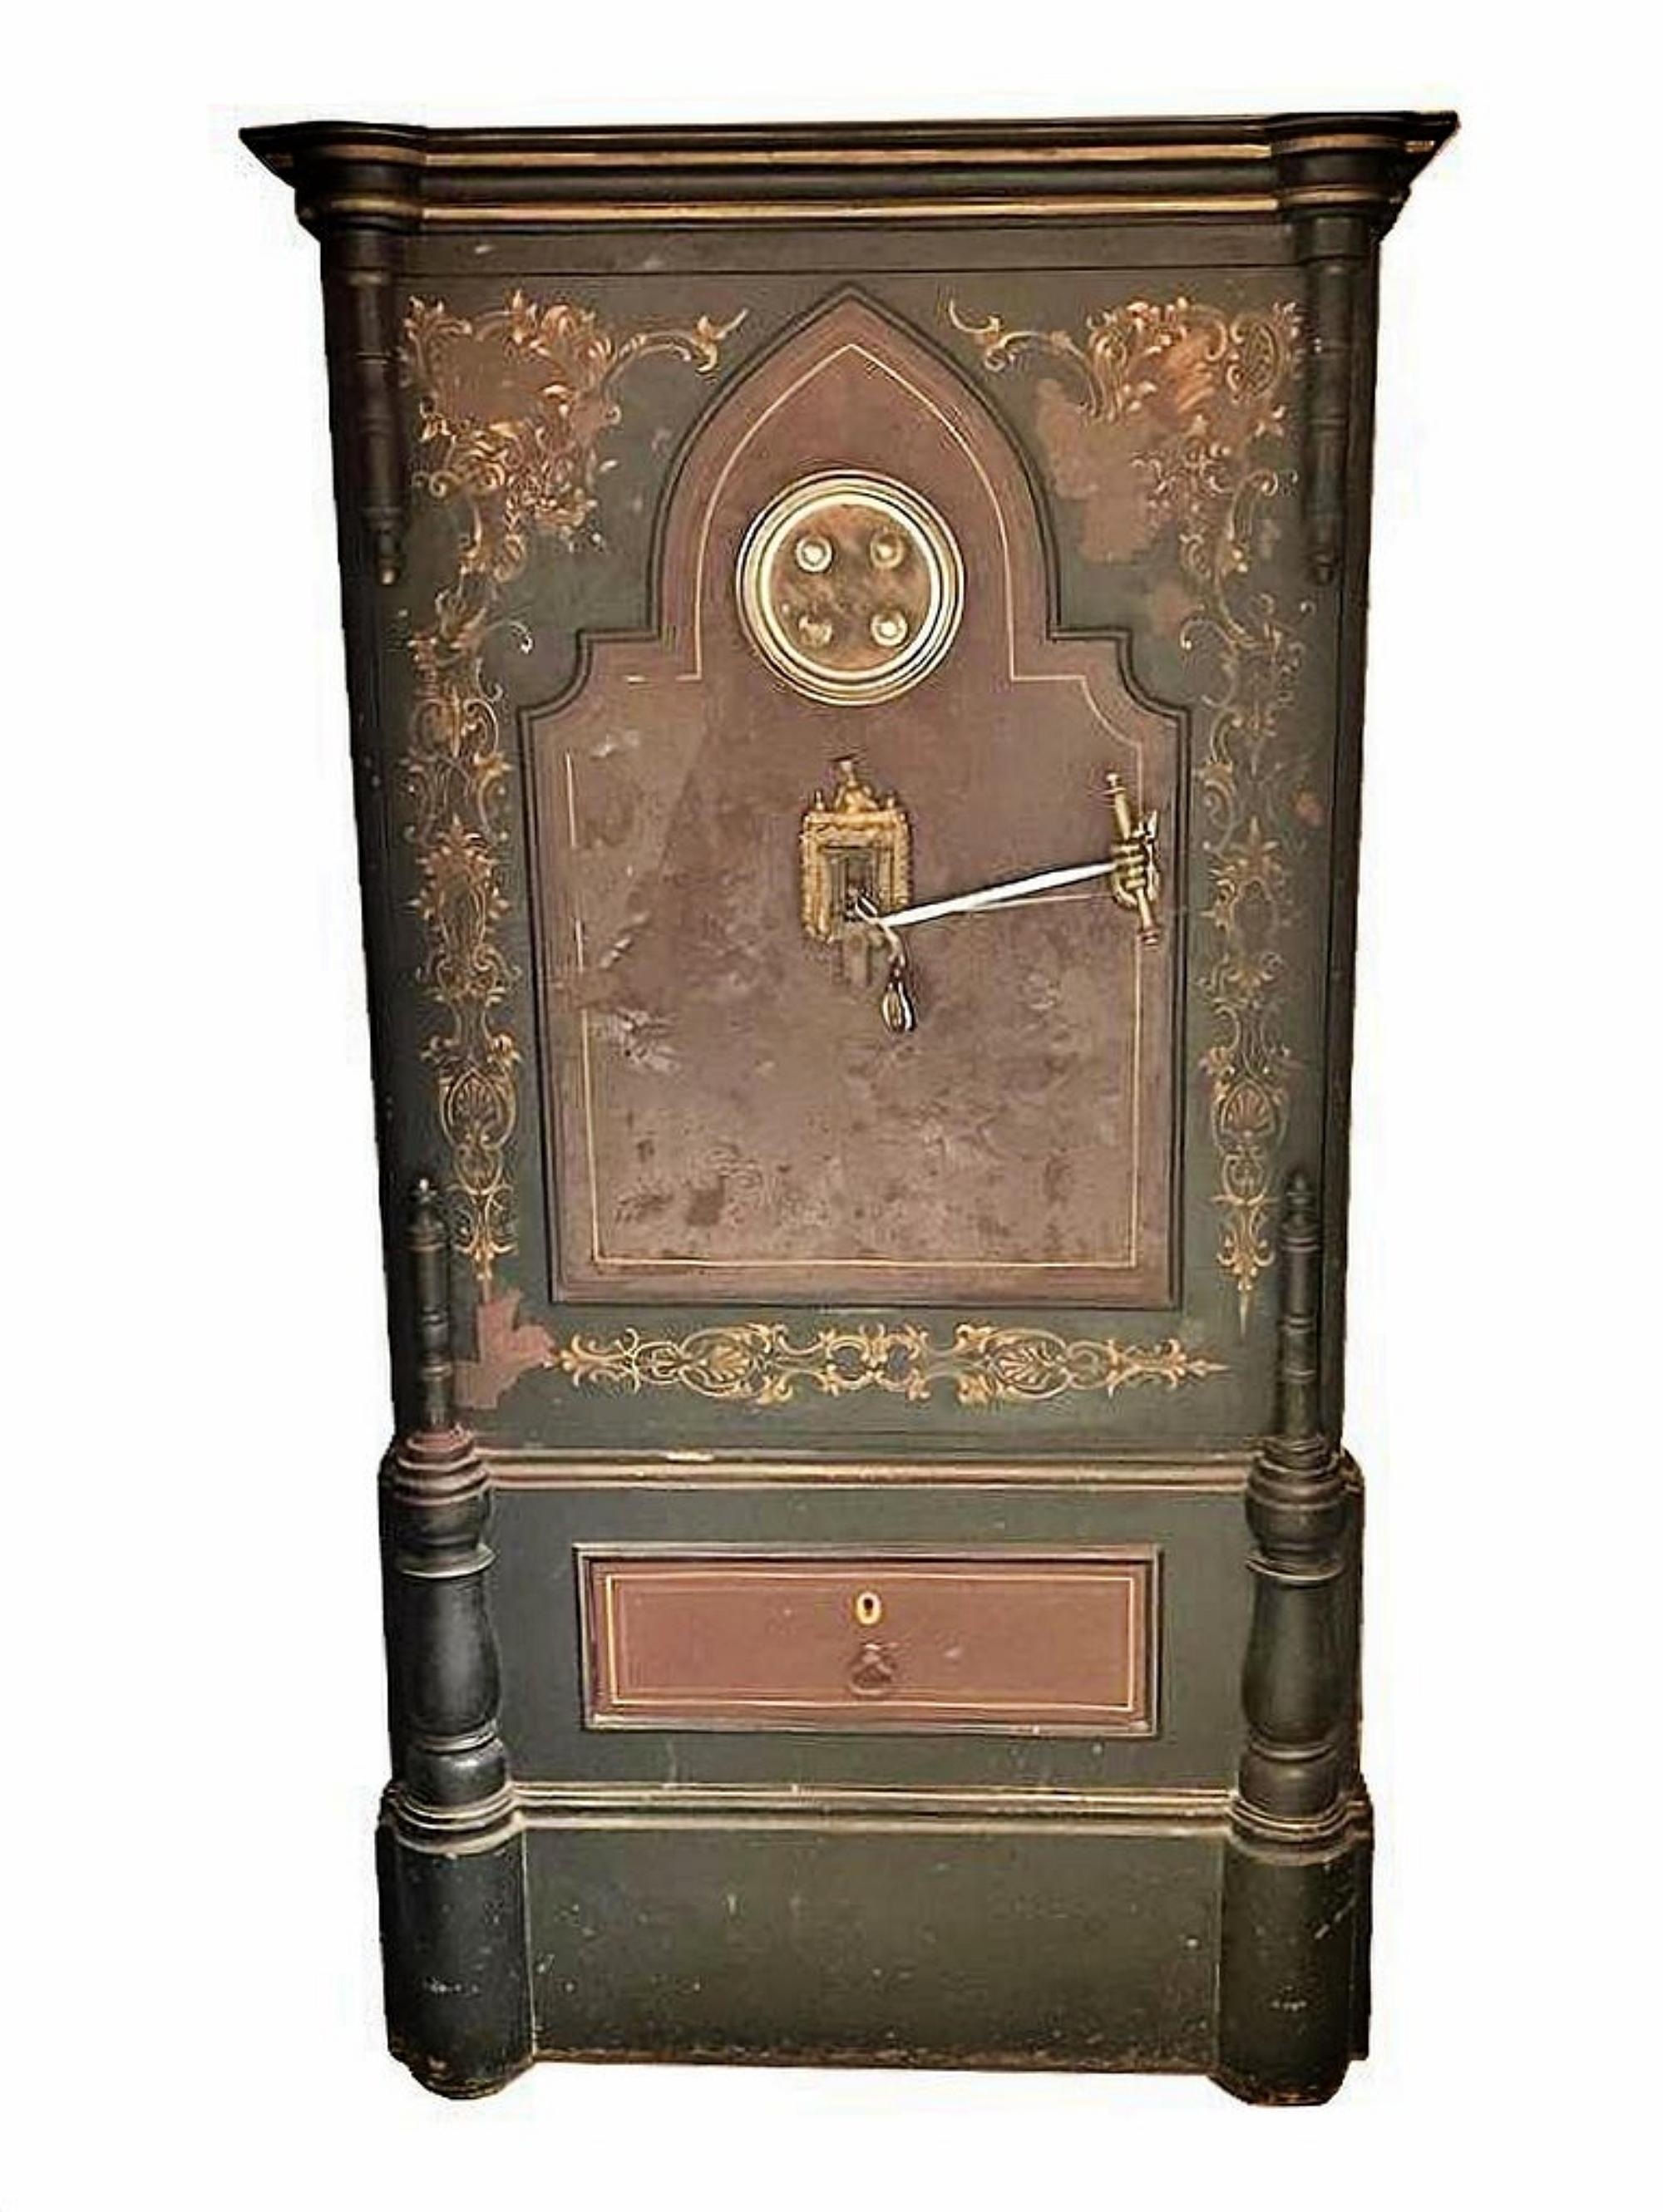 French safe

of the 19th Century
in iron, wood and other materials.
Decoration painted with a drawer.
With key.
Dimensions: 165 x 80 x 62 cm.
good conditions.